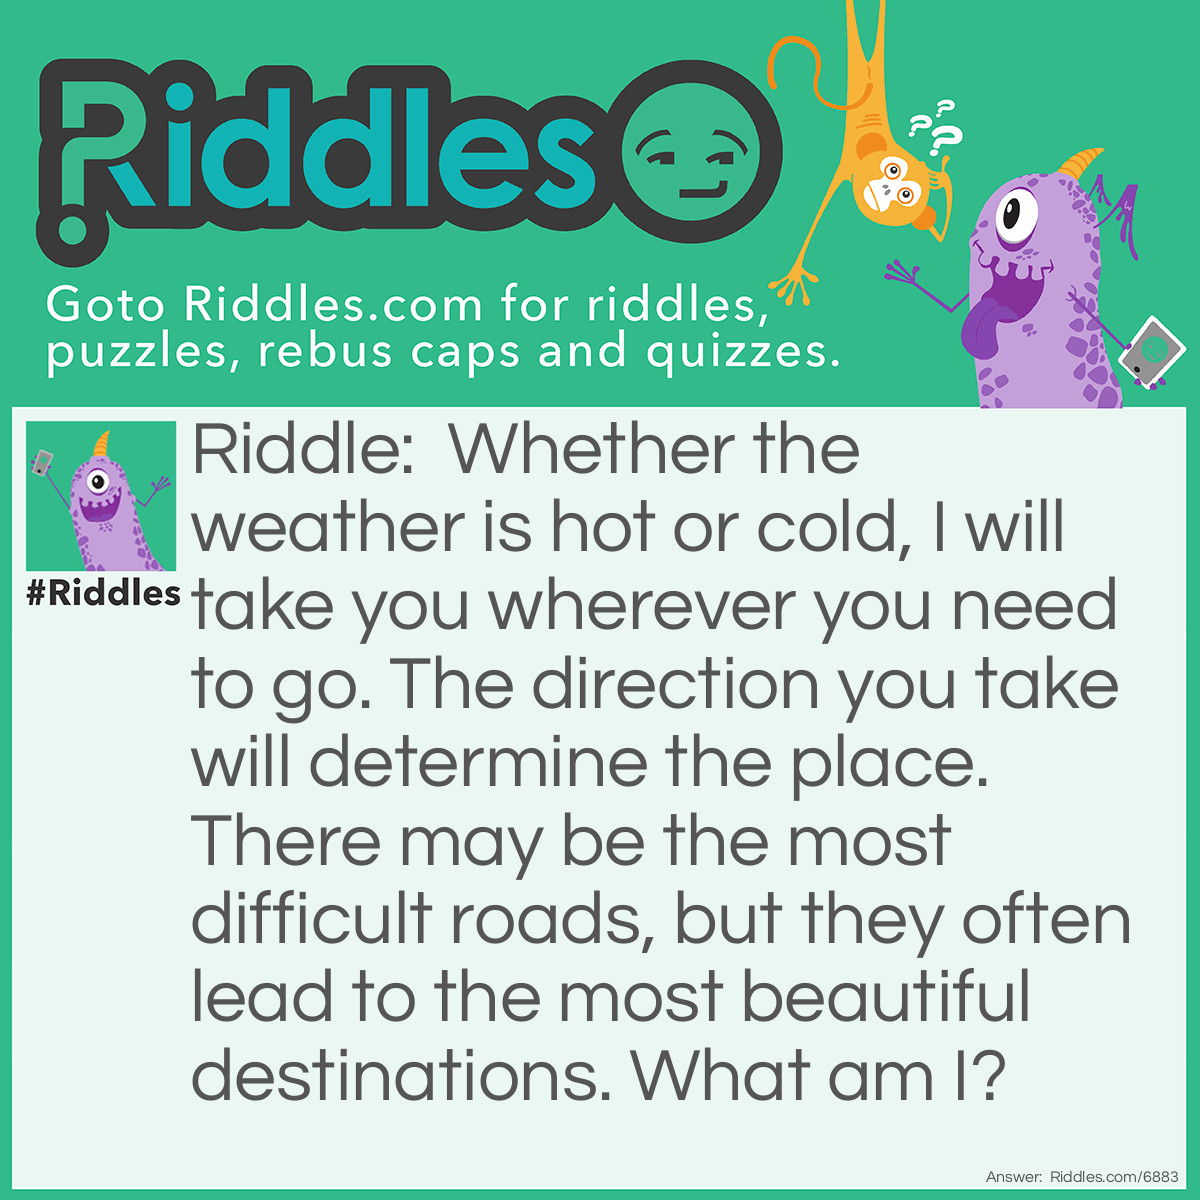 Riddle: Whether the weather is hot or cold, I will take you wherever you need to go. The direction you take, will determine the place. There may be the most difficult roads, but they often lead to the most beautiful destinations. What am I? Answer: A journey.